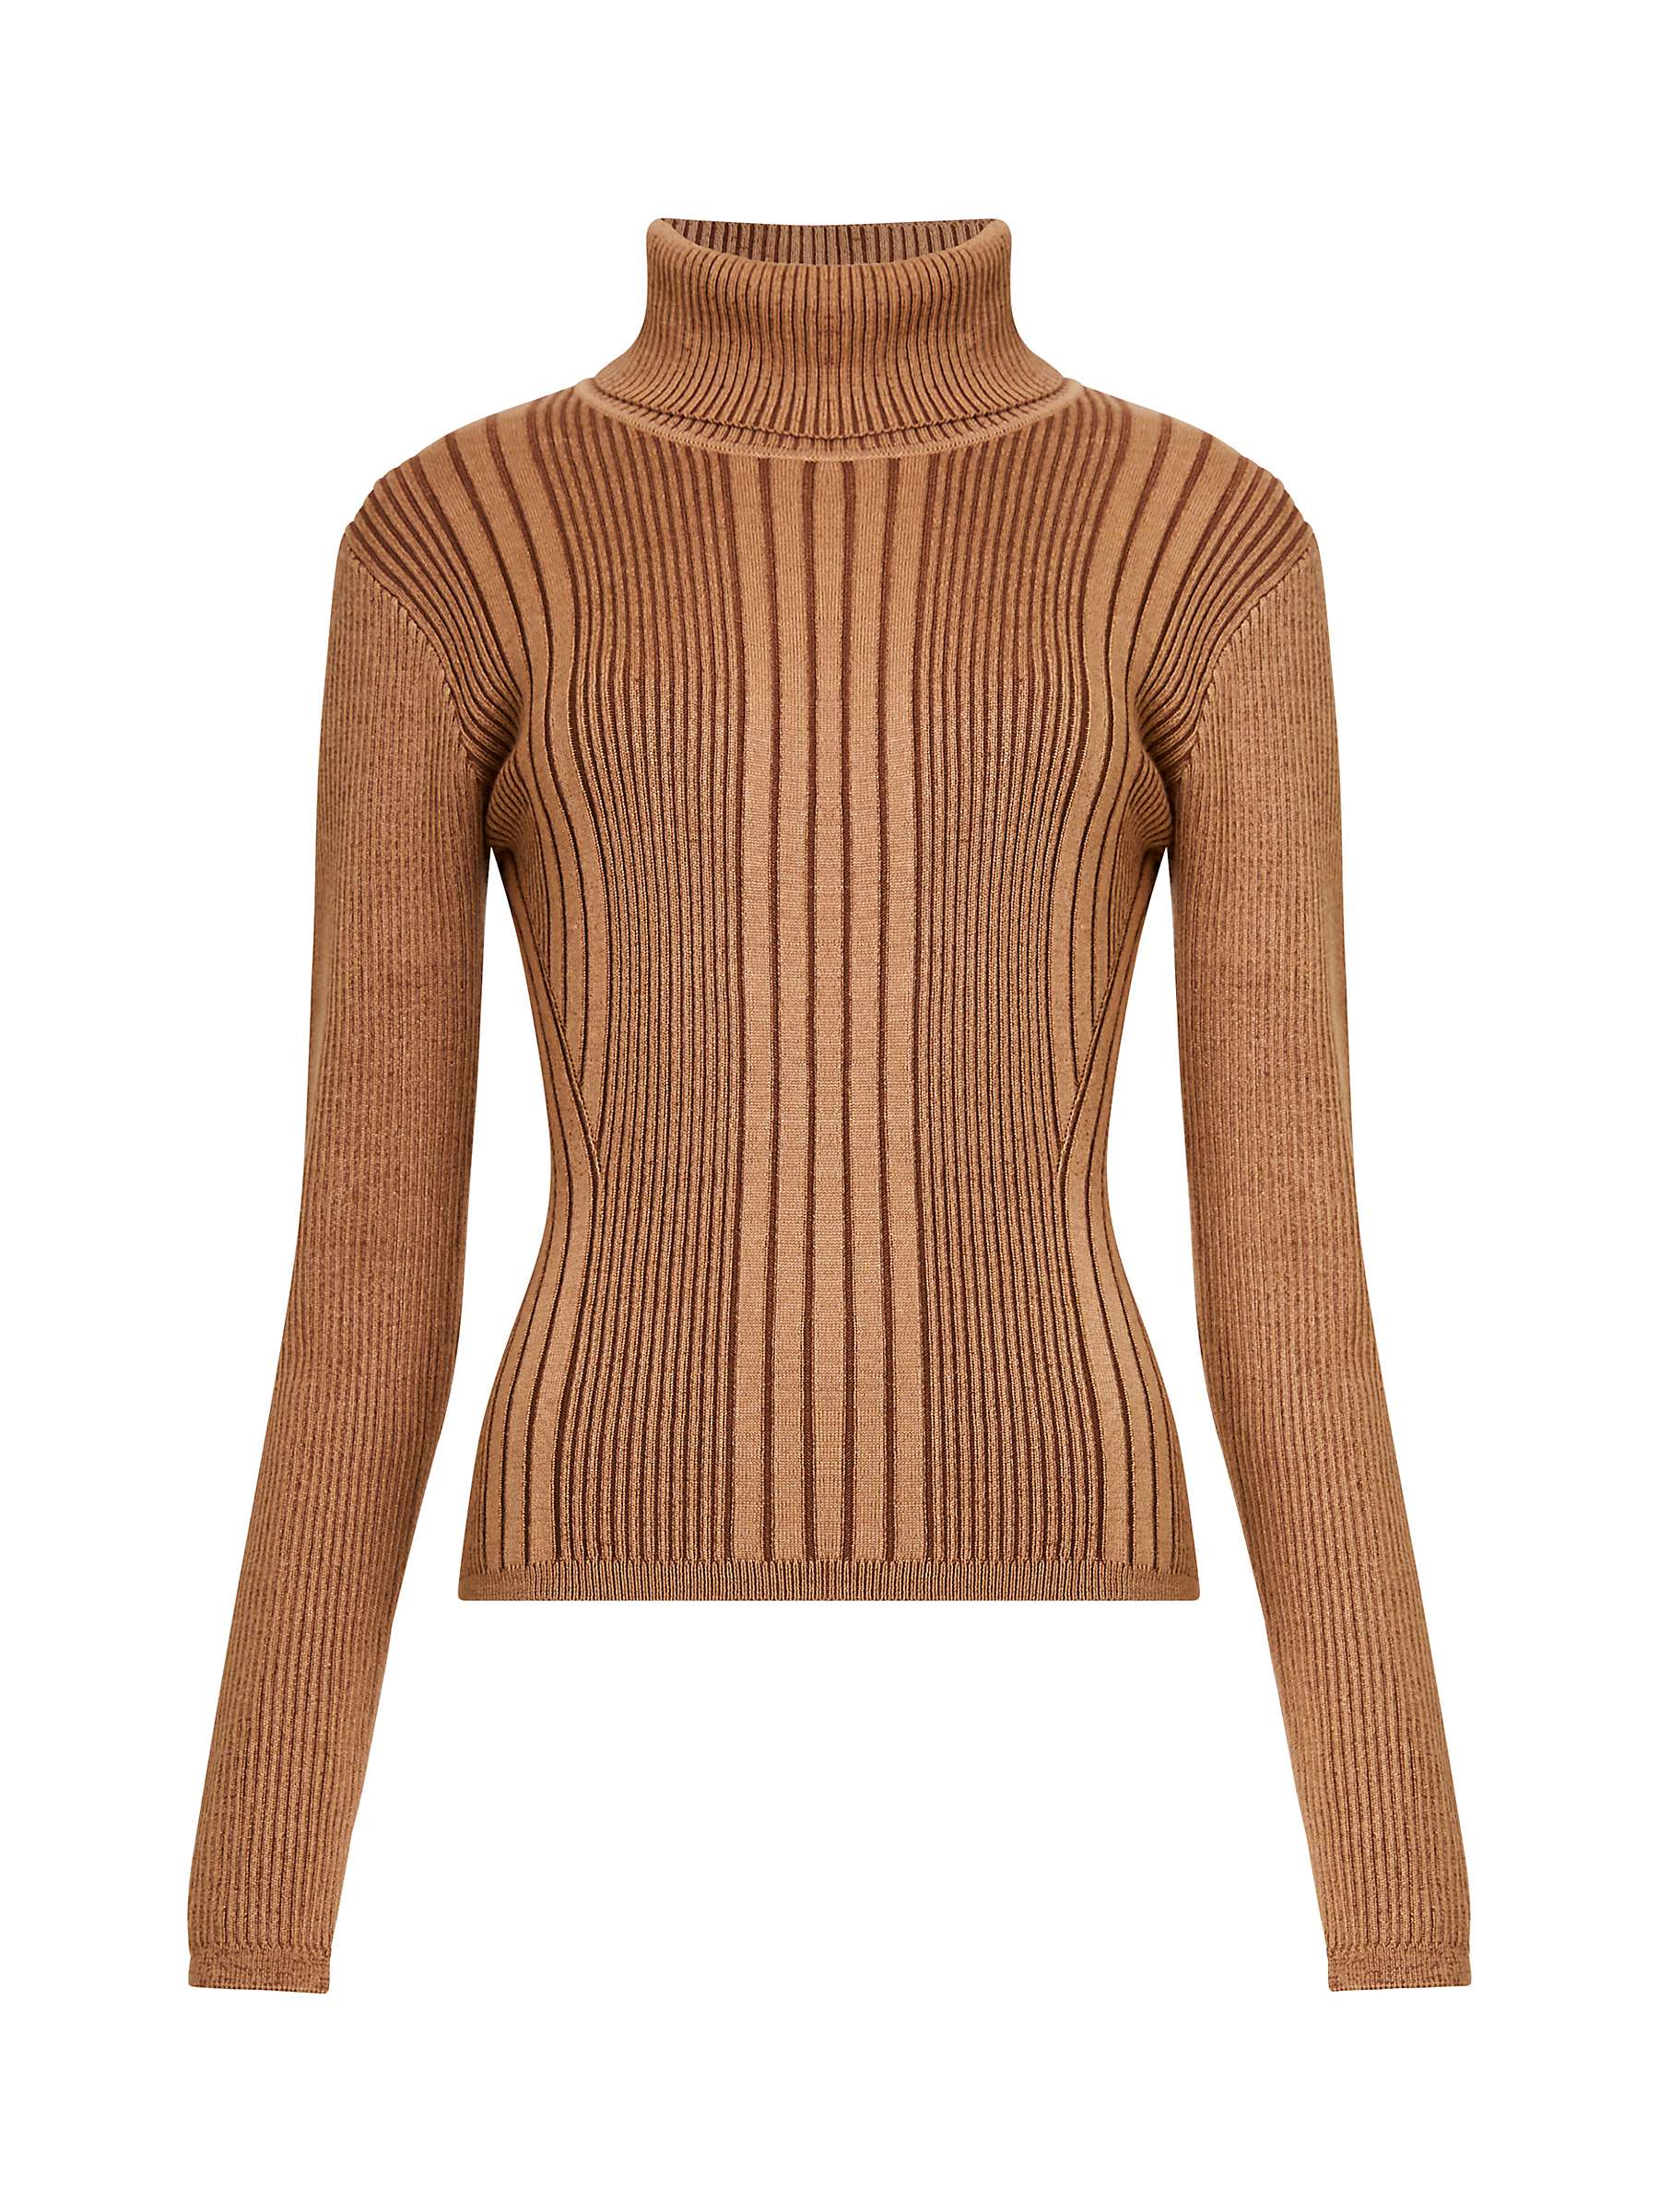 Buy French Connection Mari Roll Neck Jumper Online at johnlewis.com